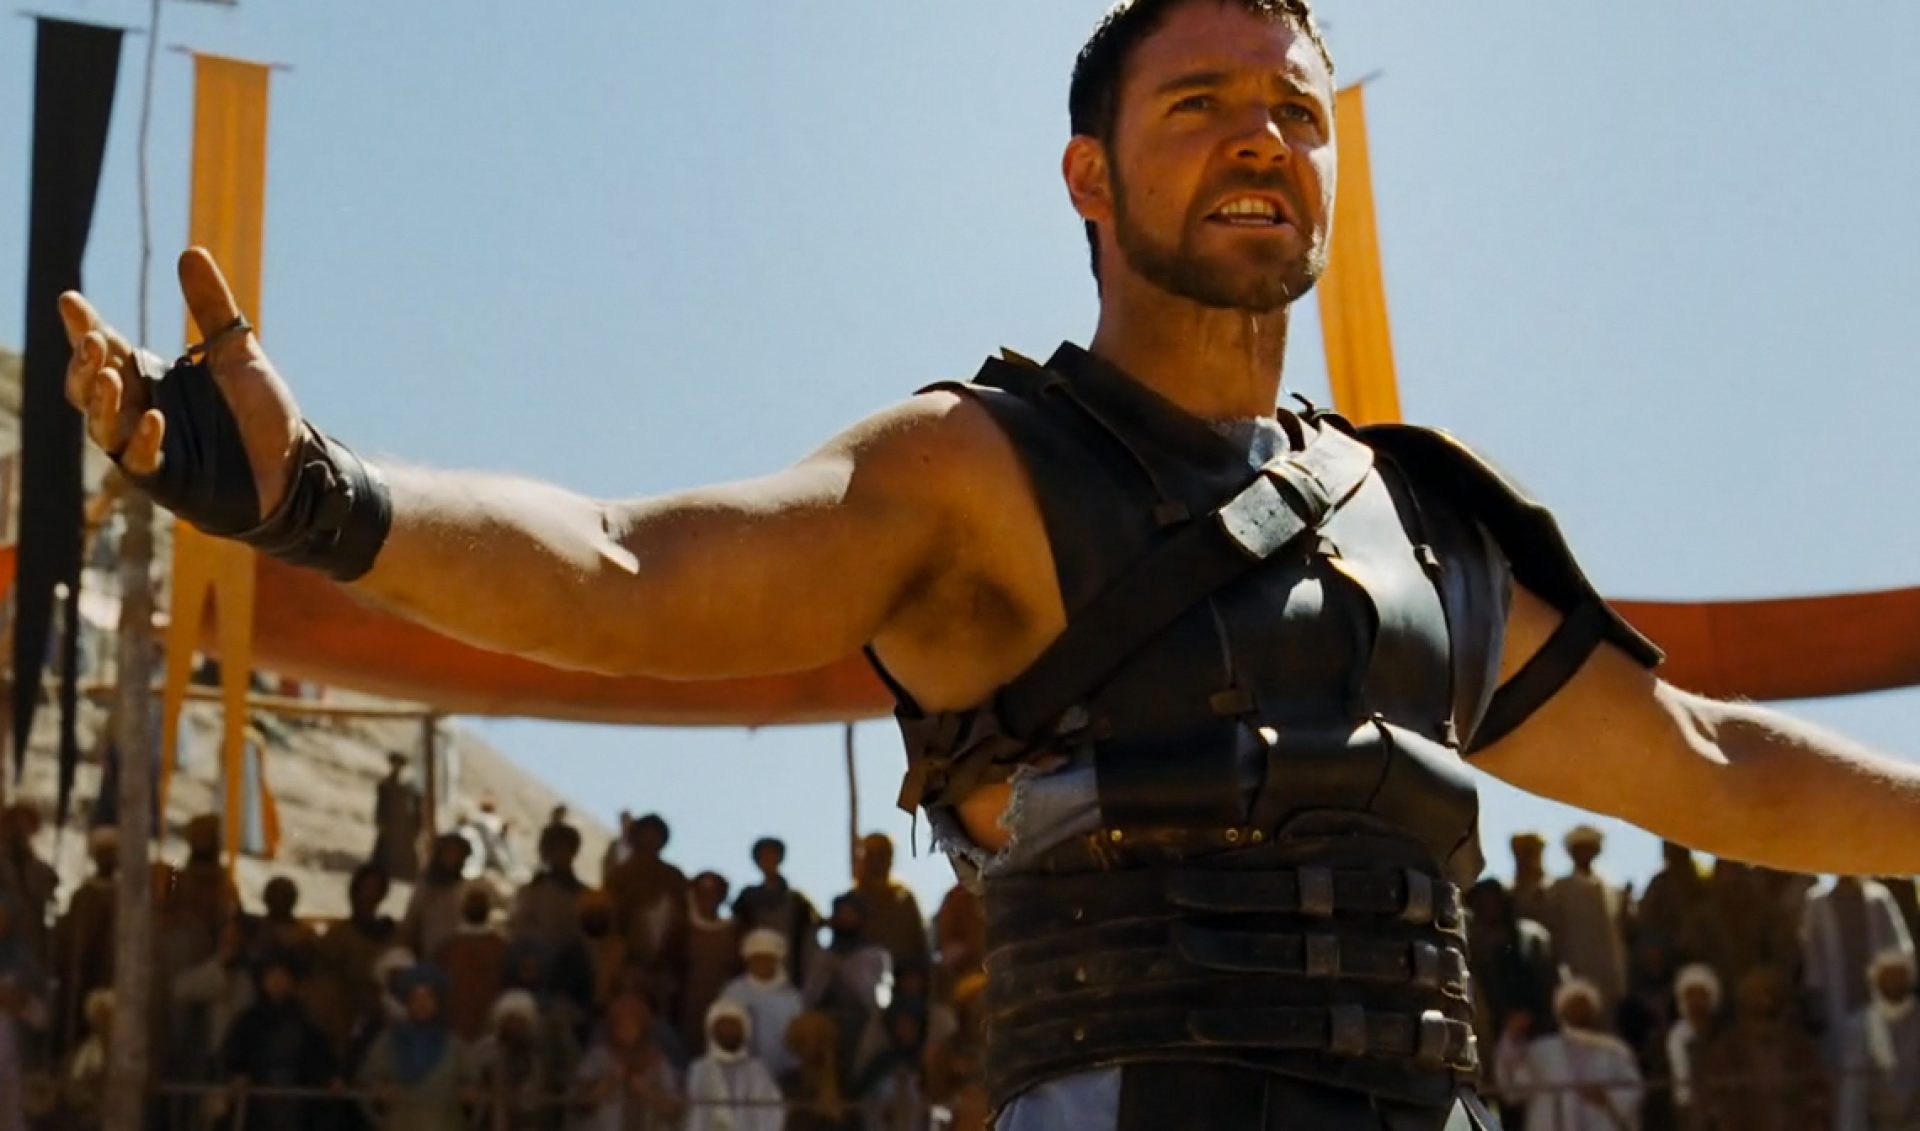 Are You Not Entertained?! 5 Ways To Make (Actually) Good Branded Content